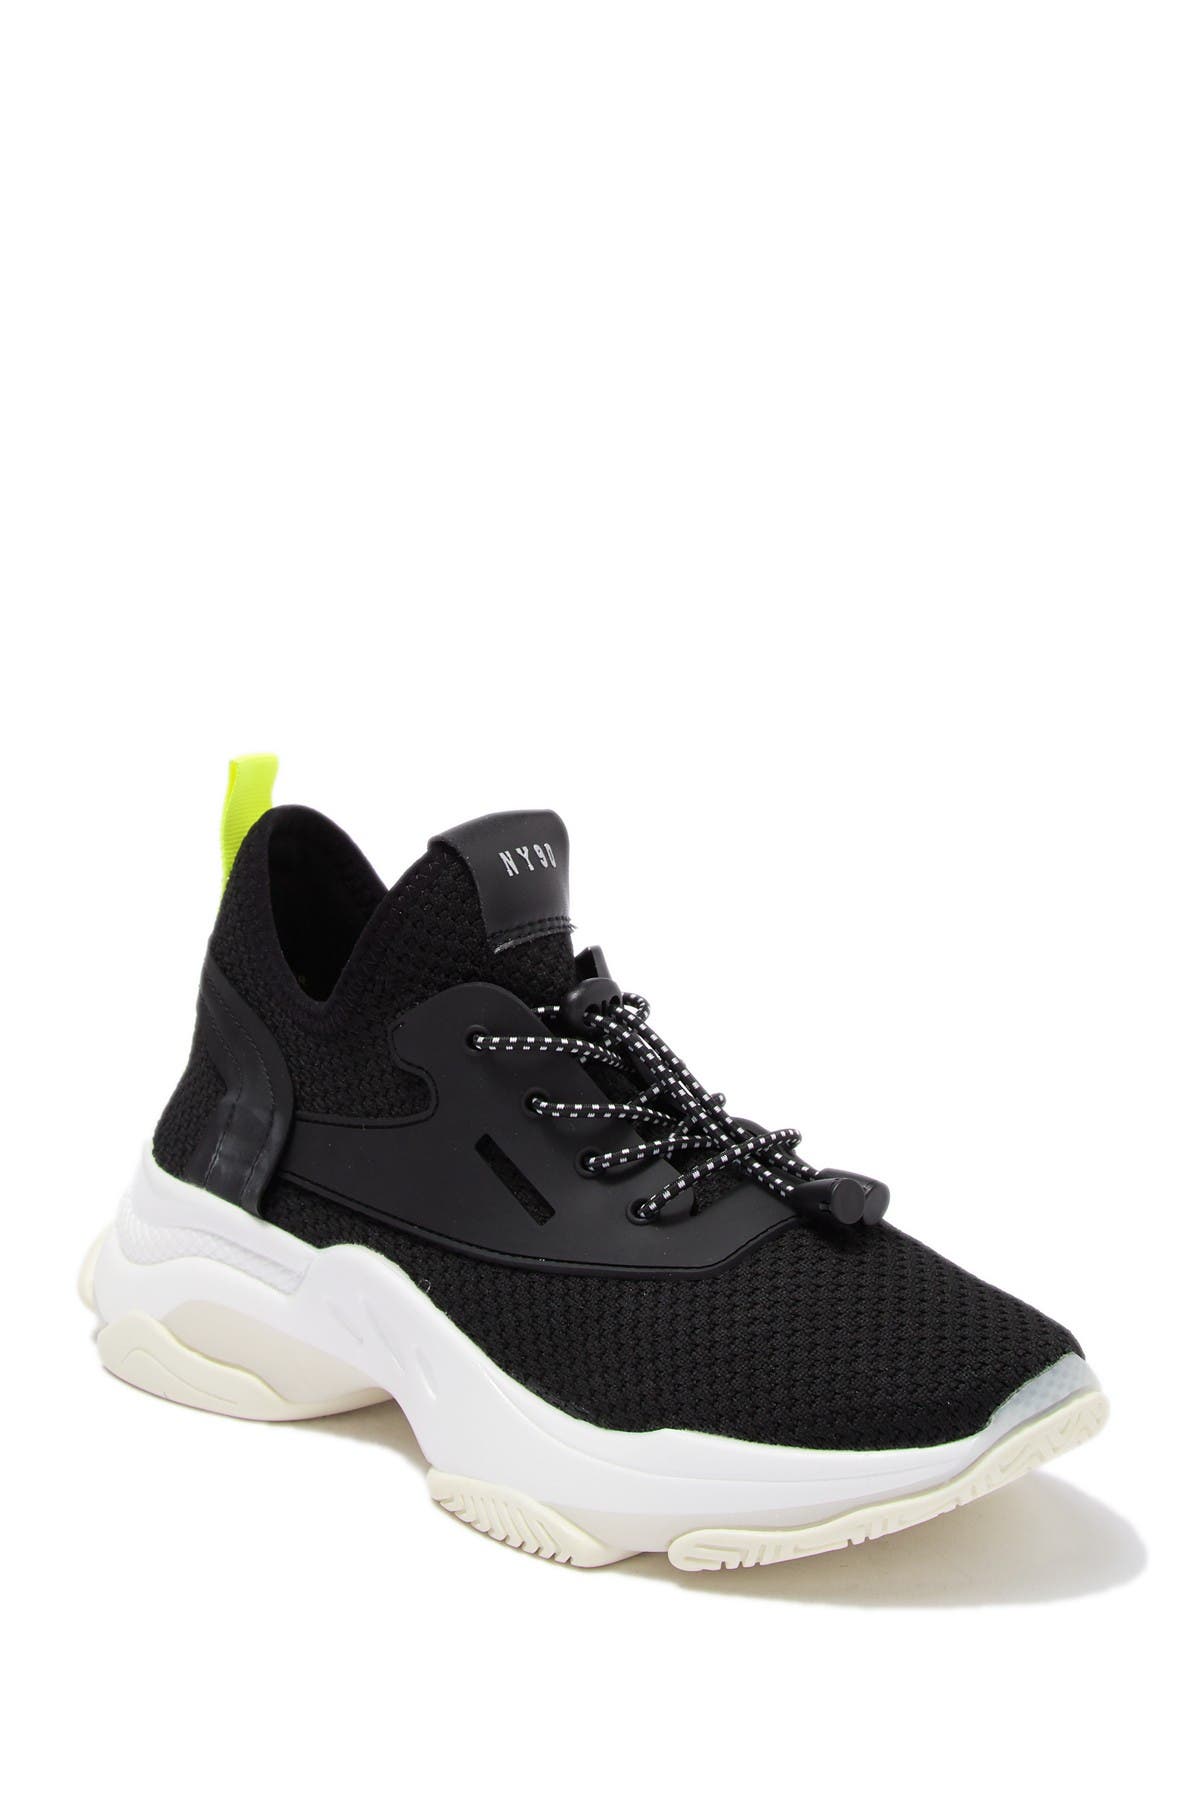 Steve Madden | Isles Lace-Up Sneaker 